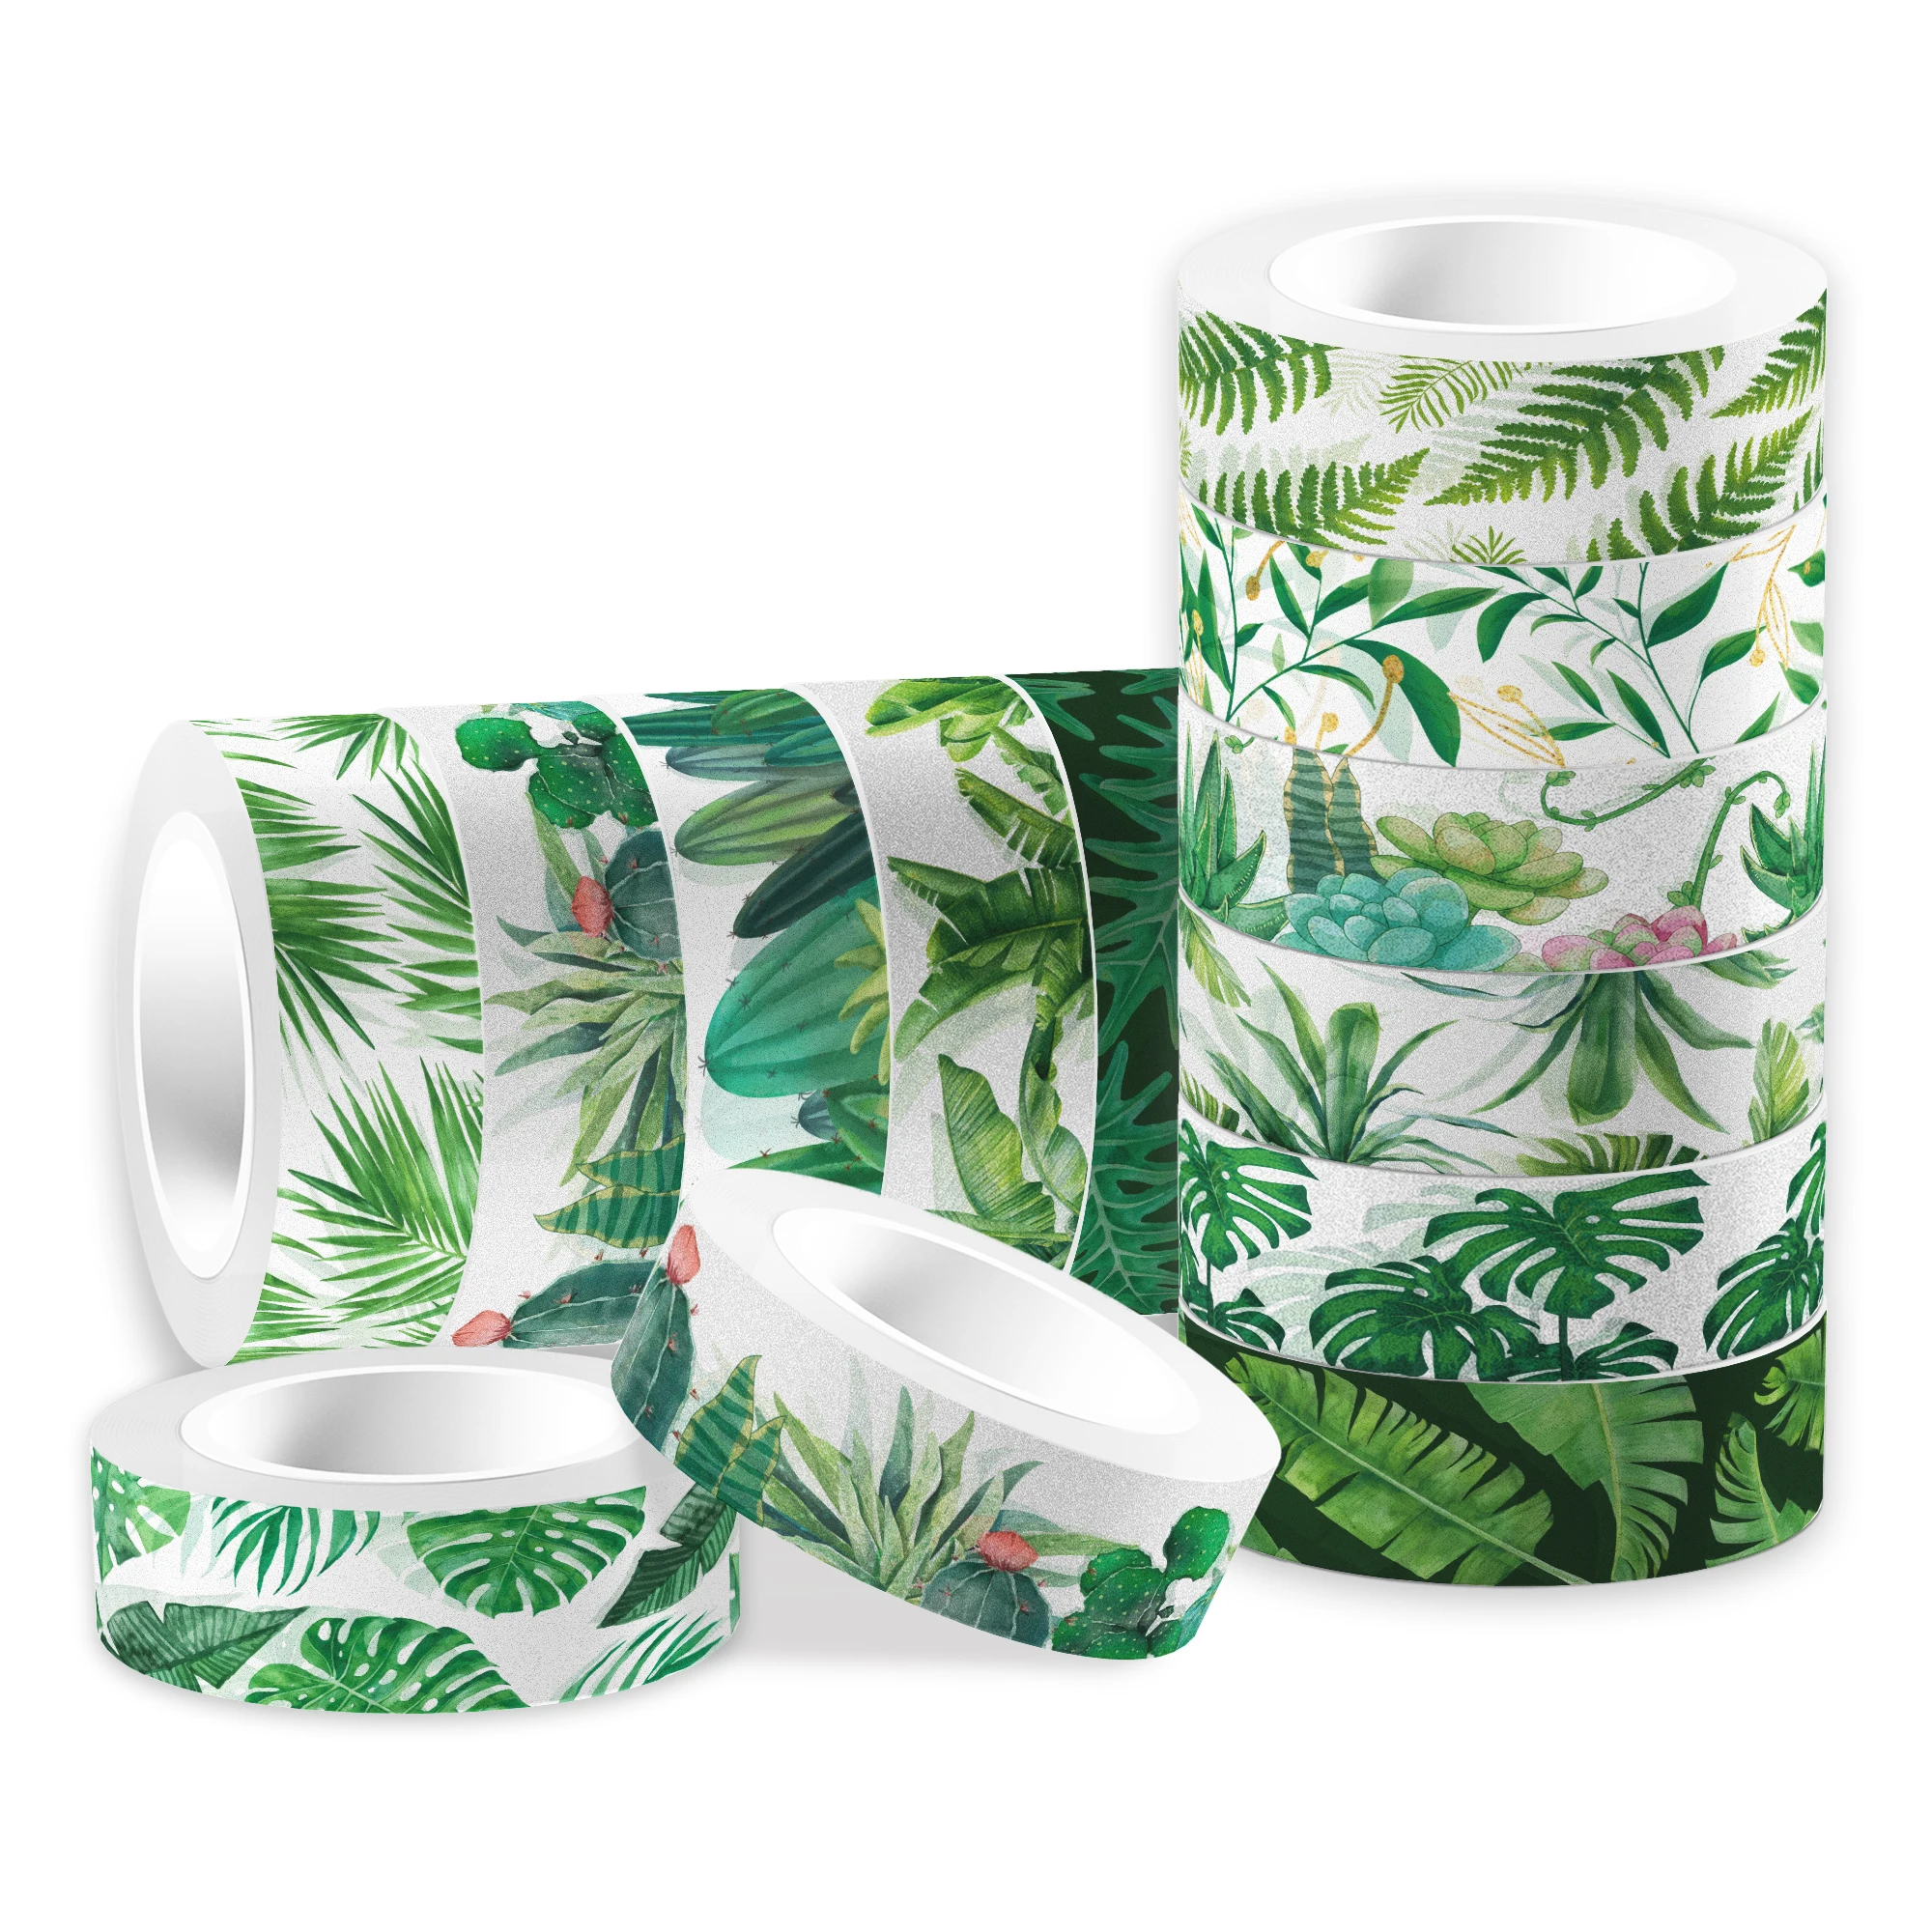 

12pcs/set Kids Cartoon Hawaii Green Palm Leaf Cactus Birthday Party Adhesive Tapes Handbook Material Baby Shower Party Supplies